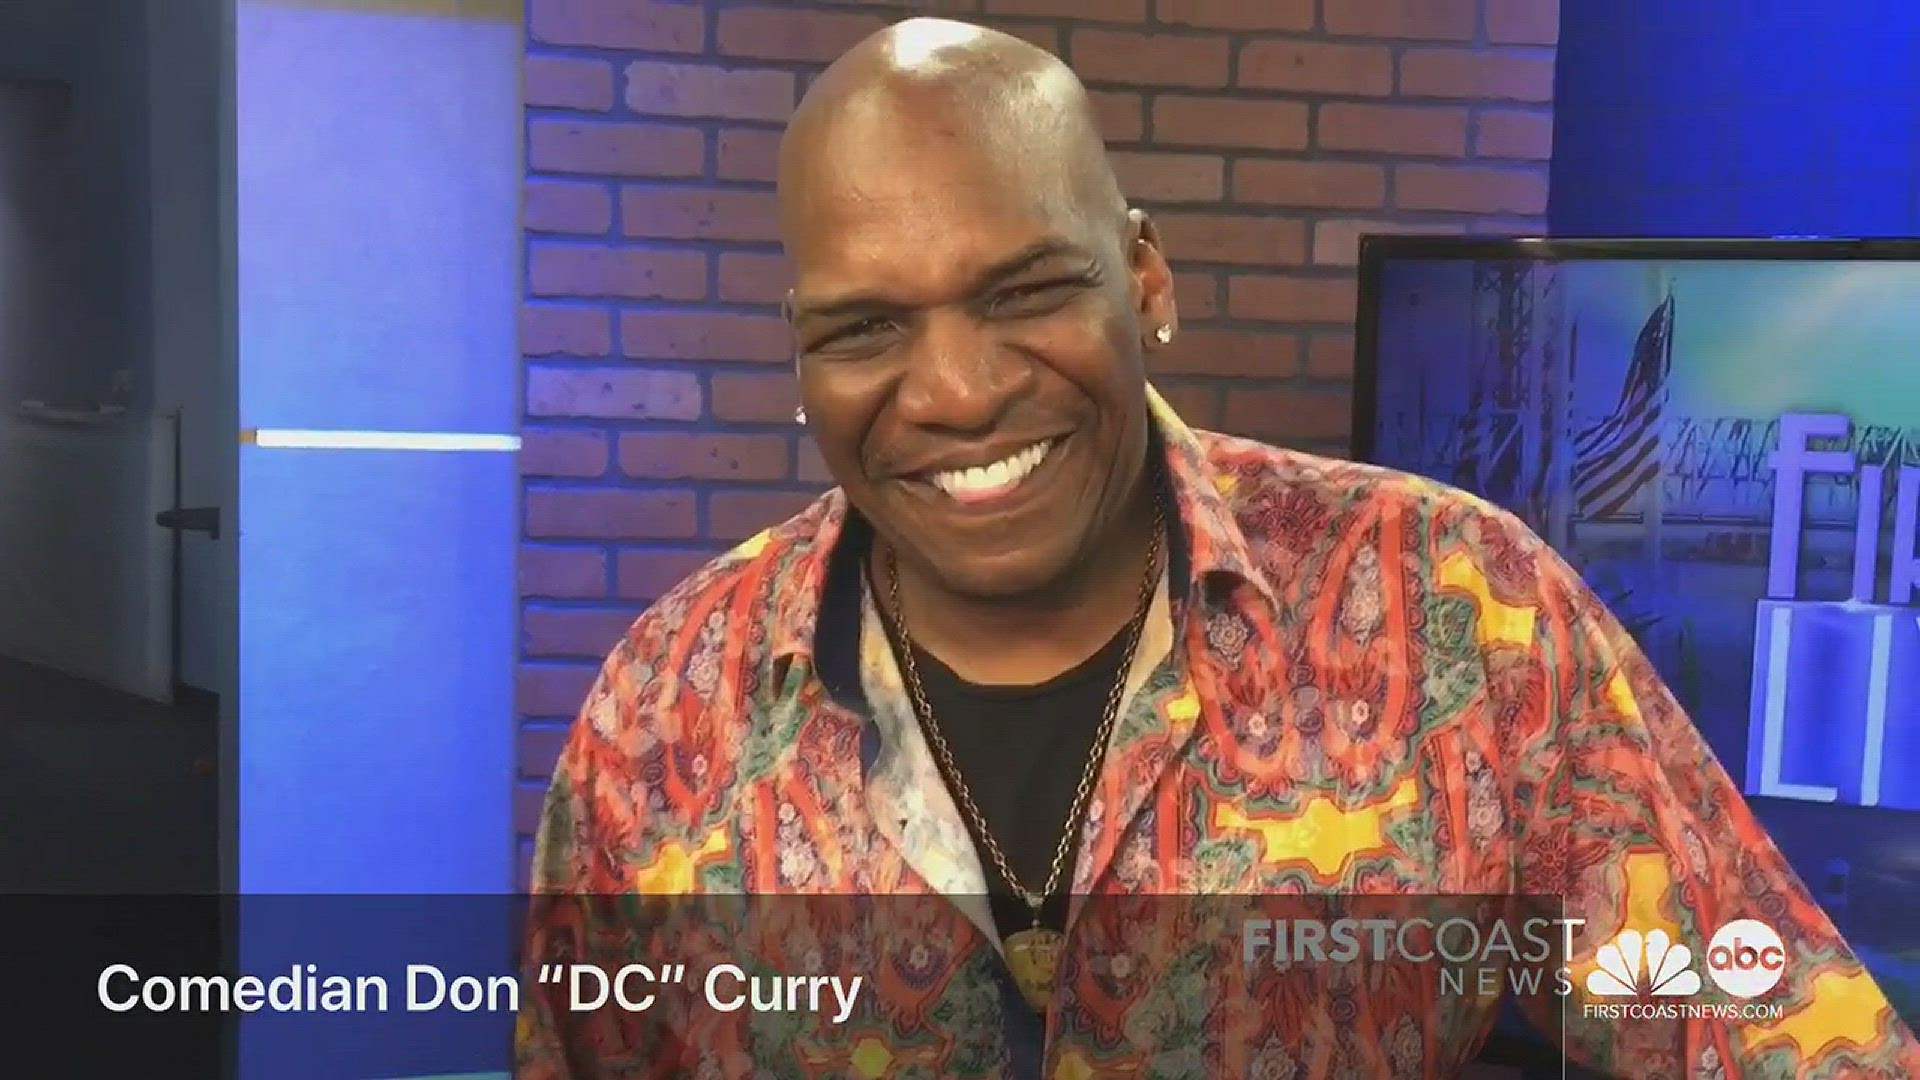 Comedian Don "DC" Curry was a guest on First Coast Living on Friday. After the show, we asked him who's the funniest person he knows and to share advice with aspiring comics.